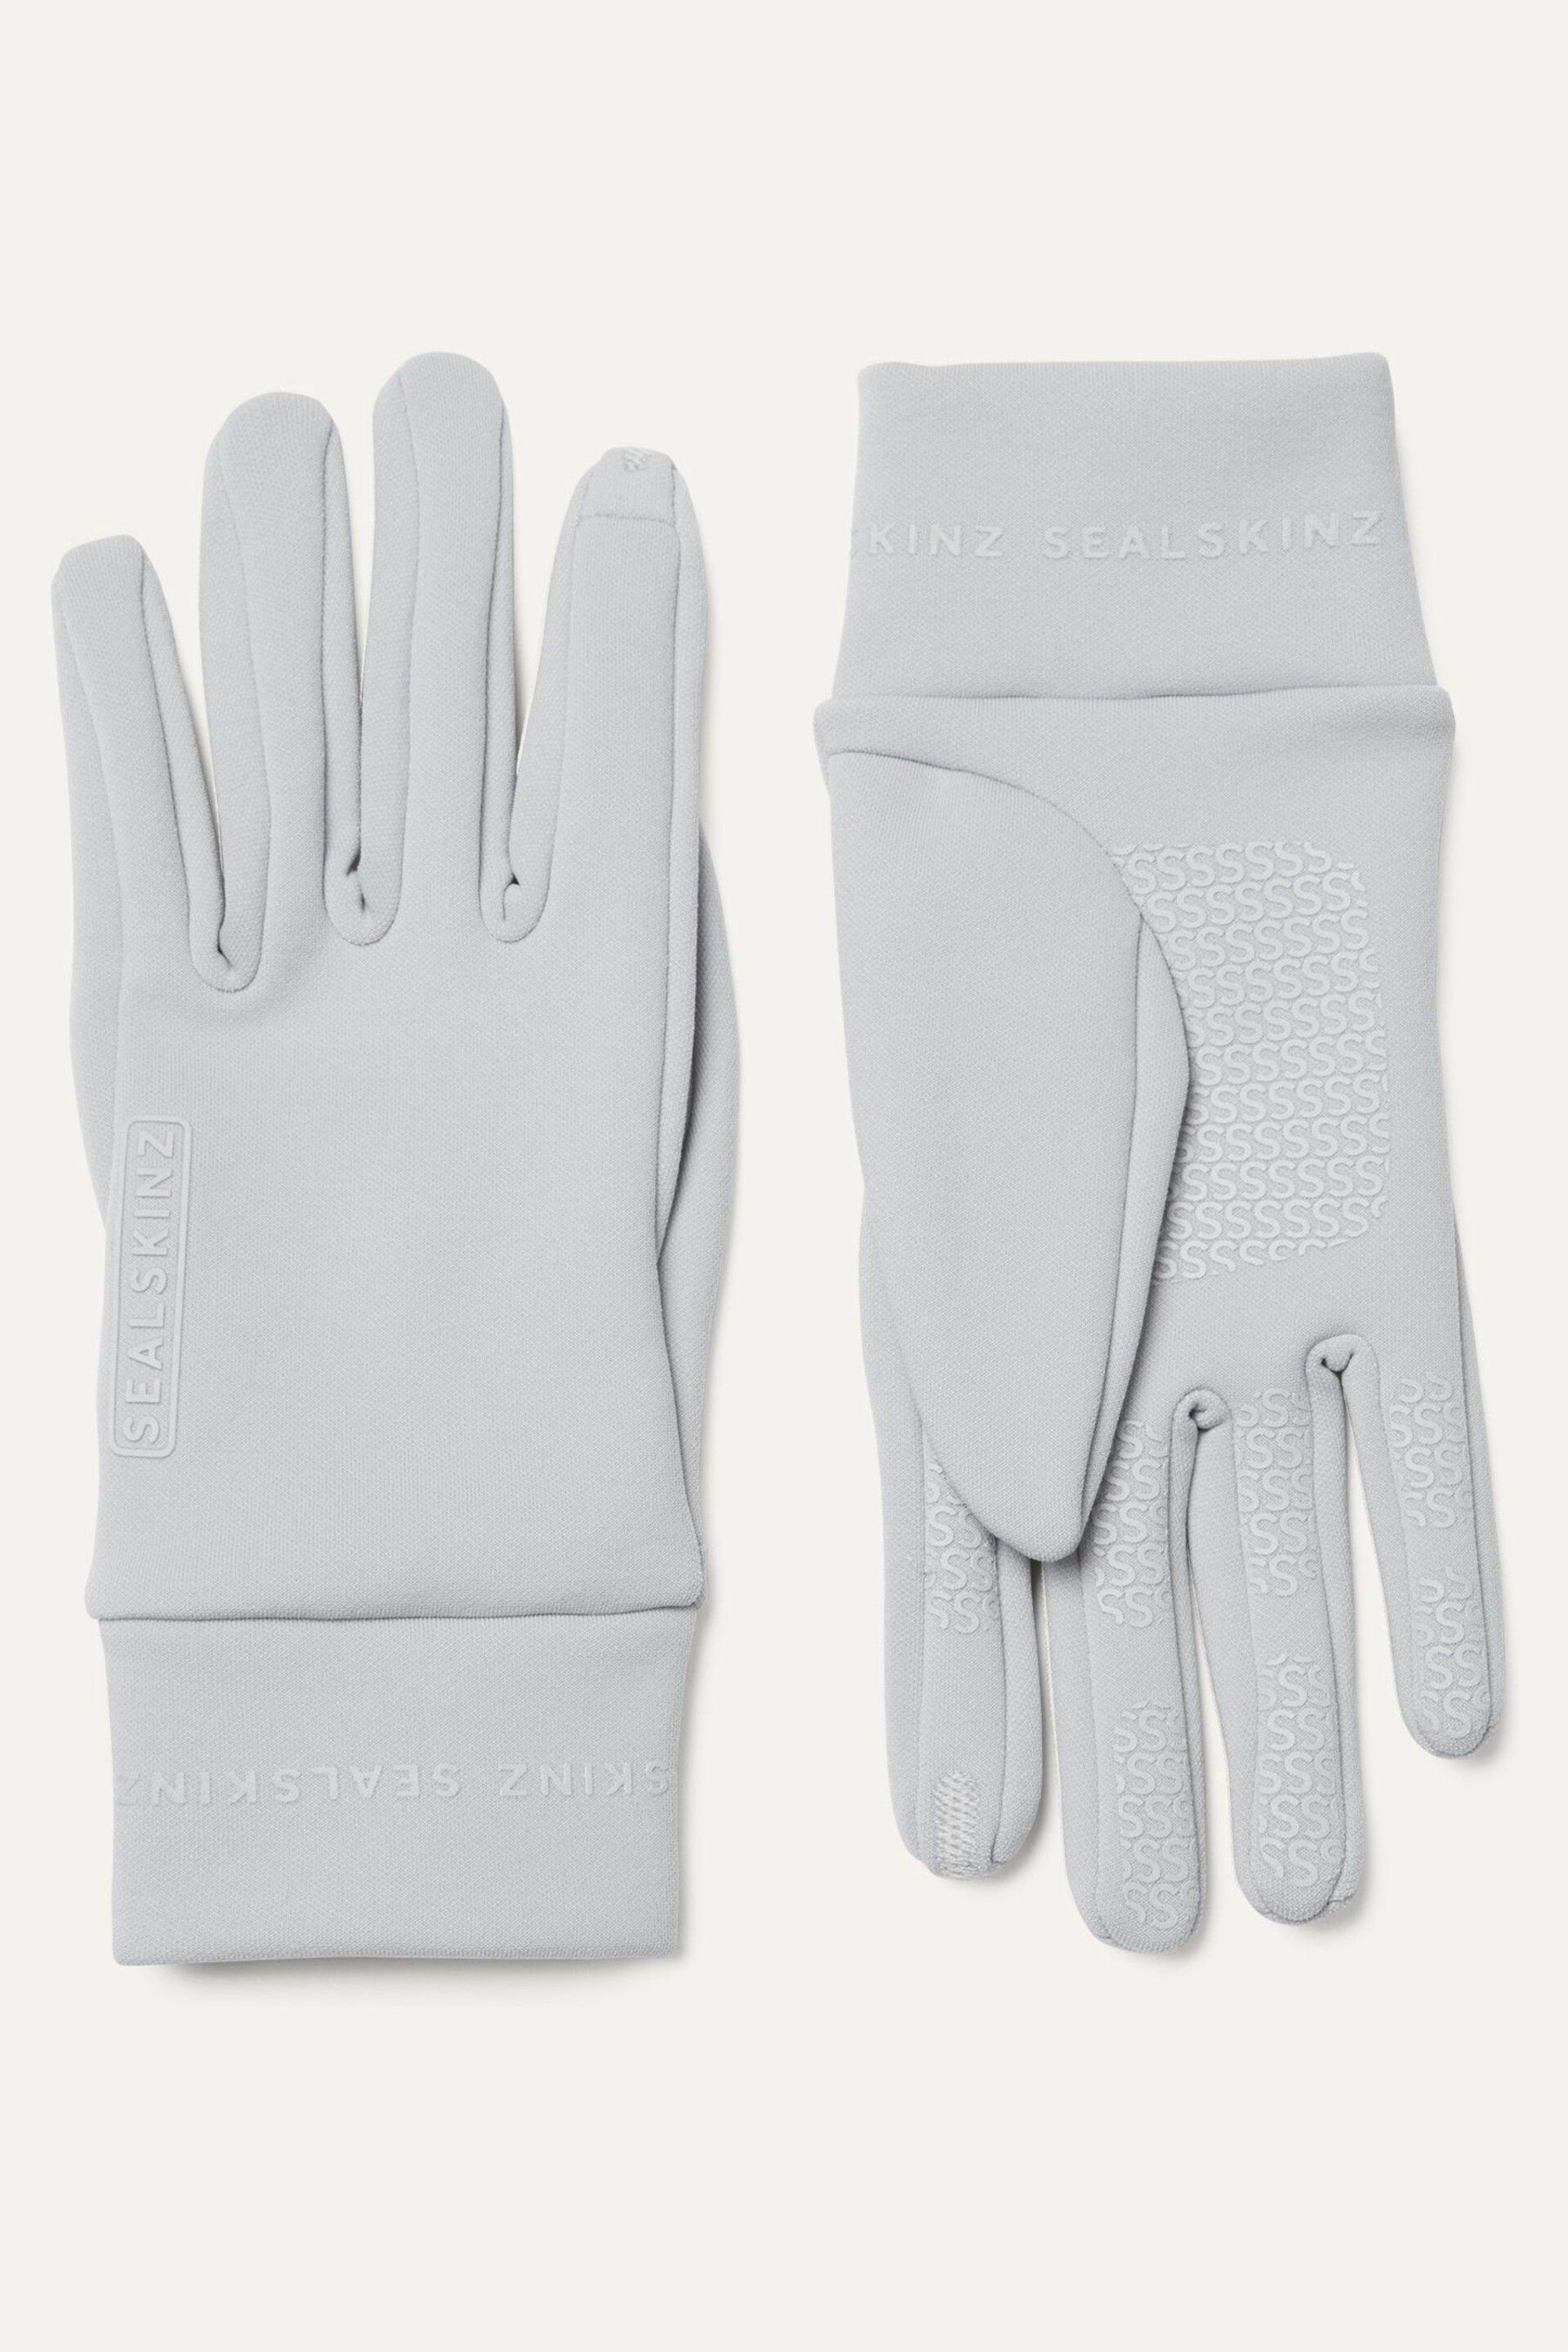 Sealskinz Womens Acle Water Repellent Nano Fleece Gloves - Image 1 of 3